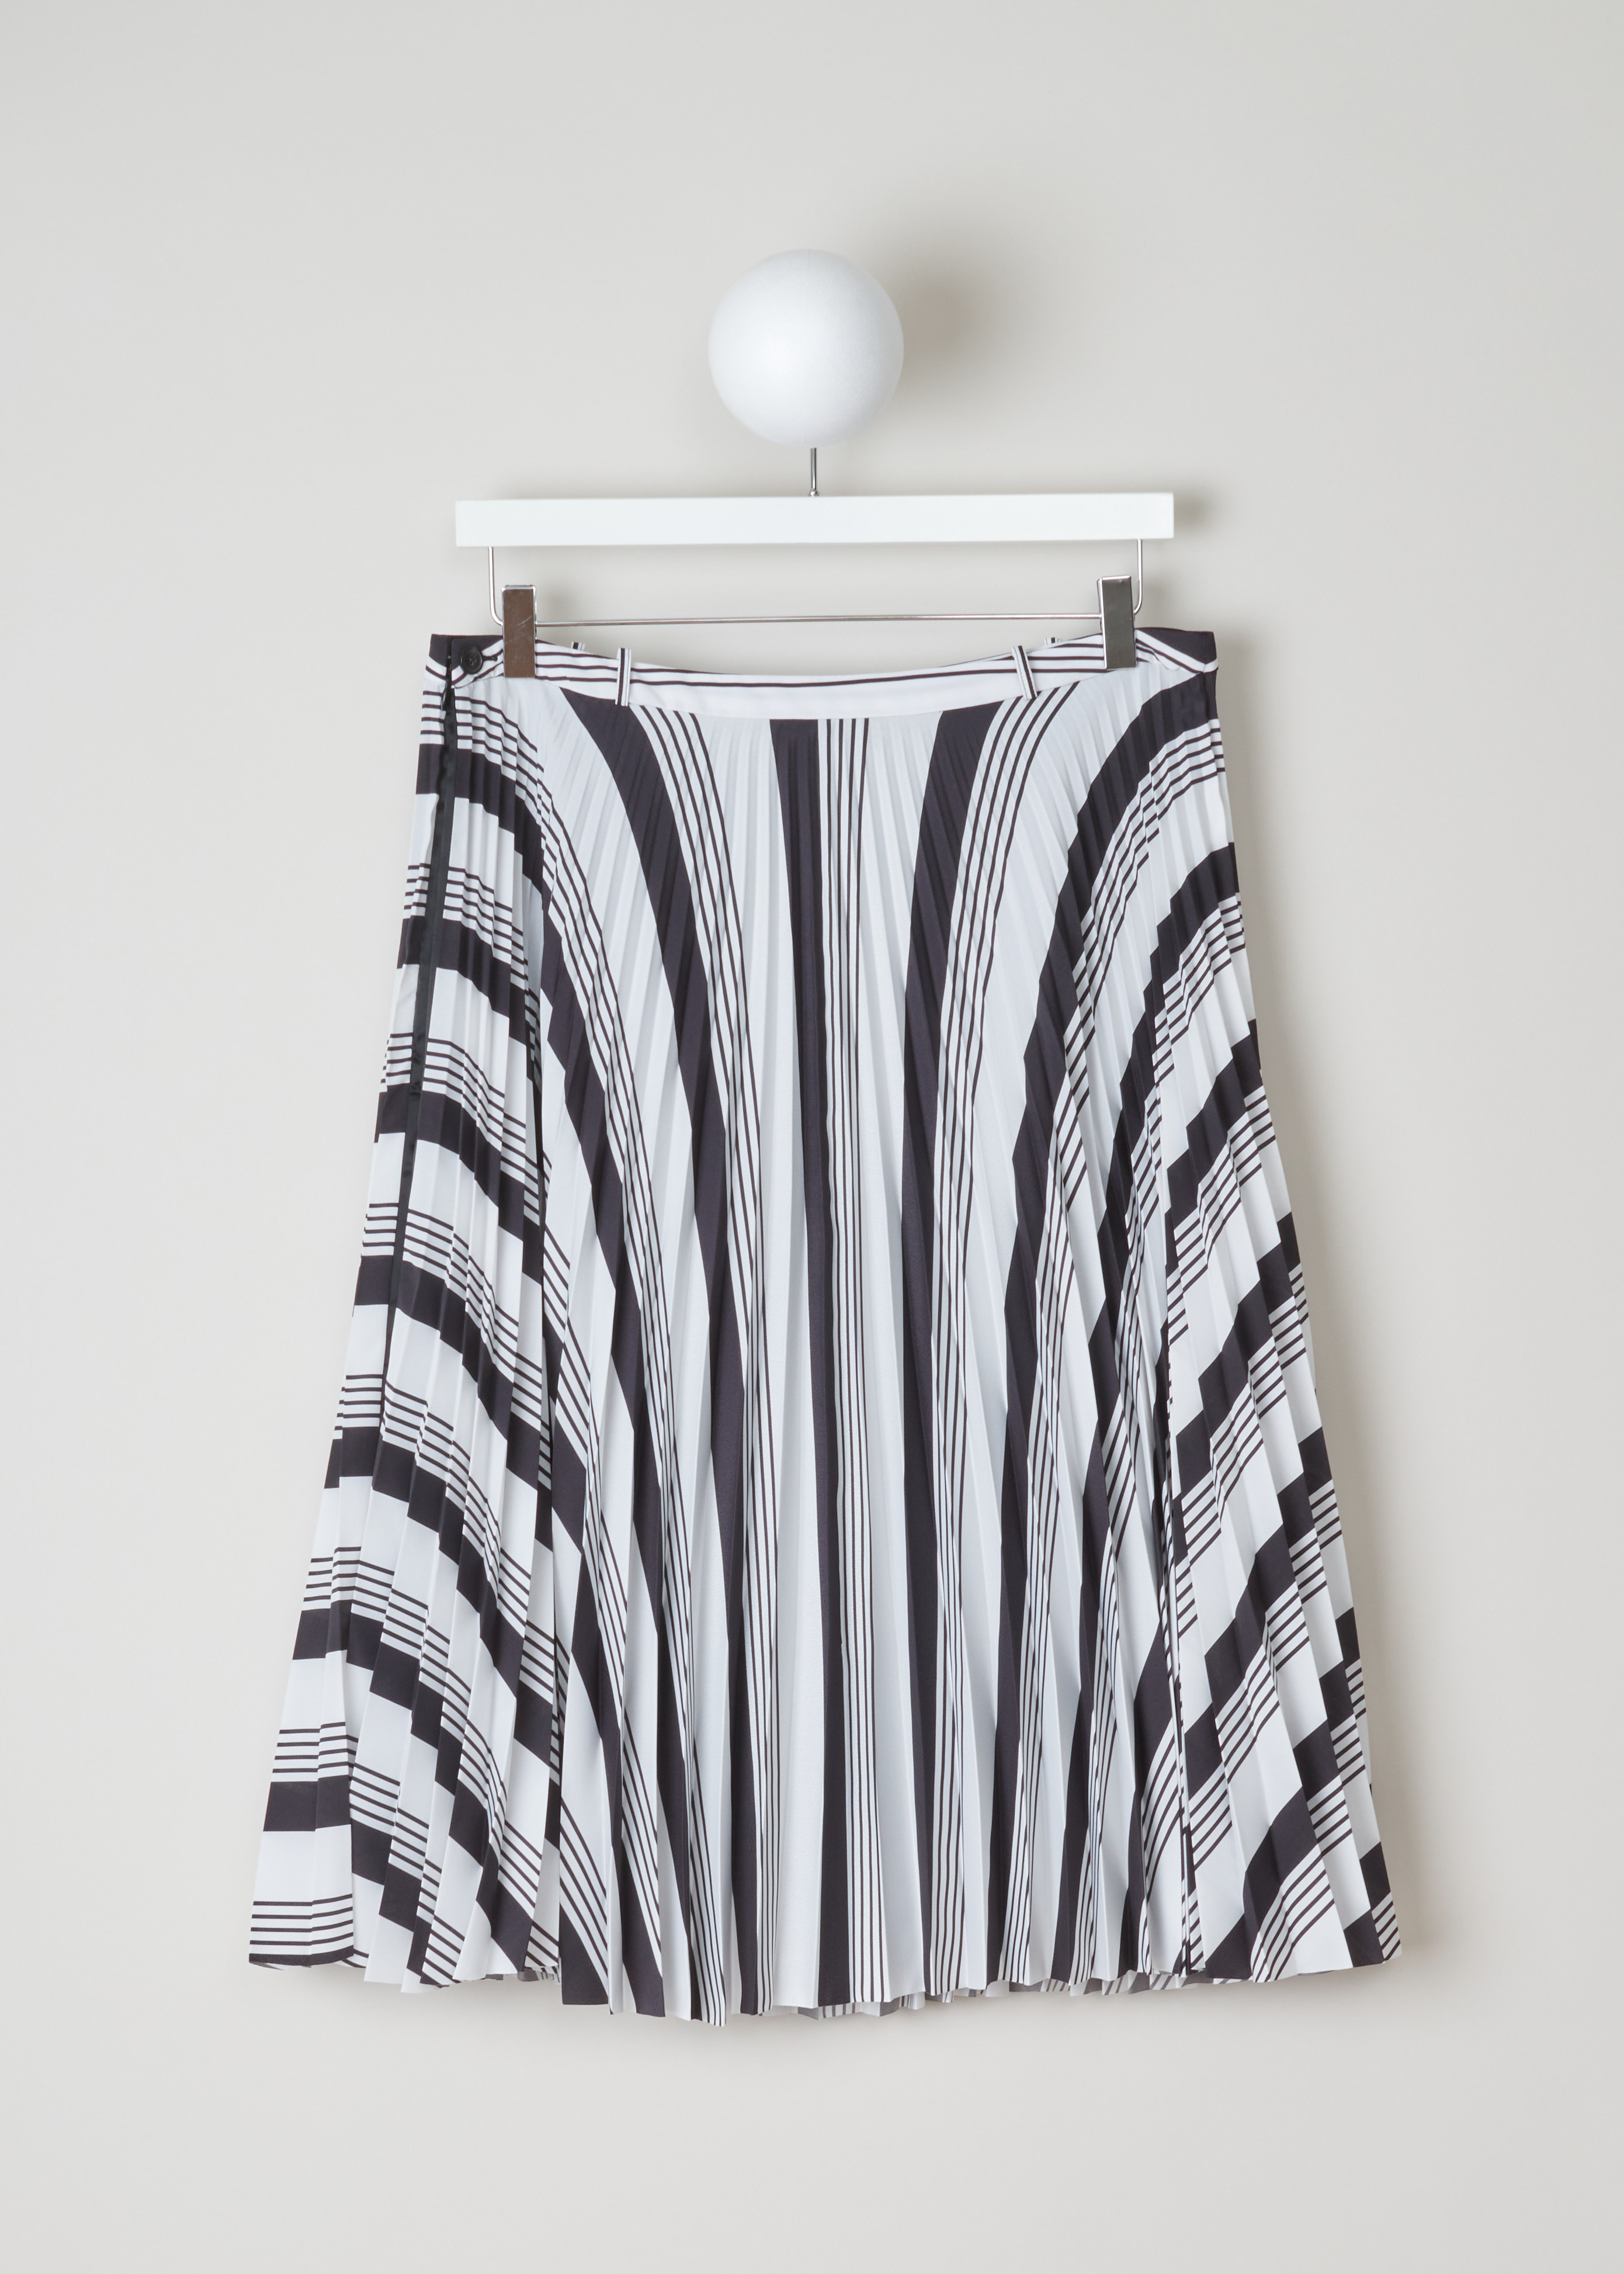 Balenciaga Striped pleated skirt 501971_TYA43_1070 noir blanc back. White plissÃ© skirt with curved black stripe pattern, small waistband with four belt hoops, invisible zipper and slit on the side.